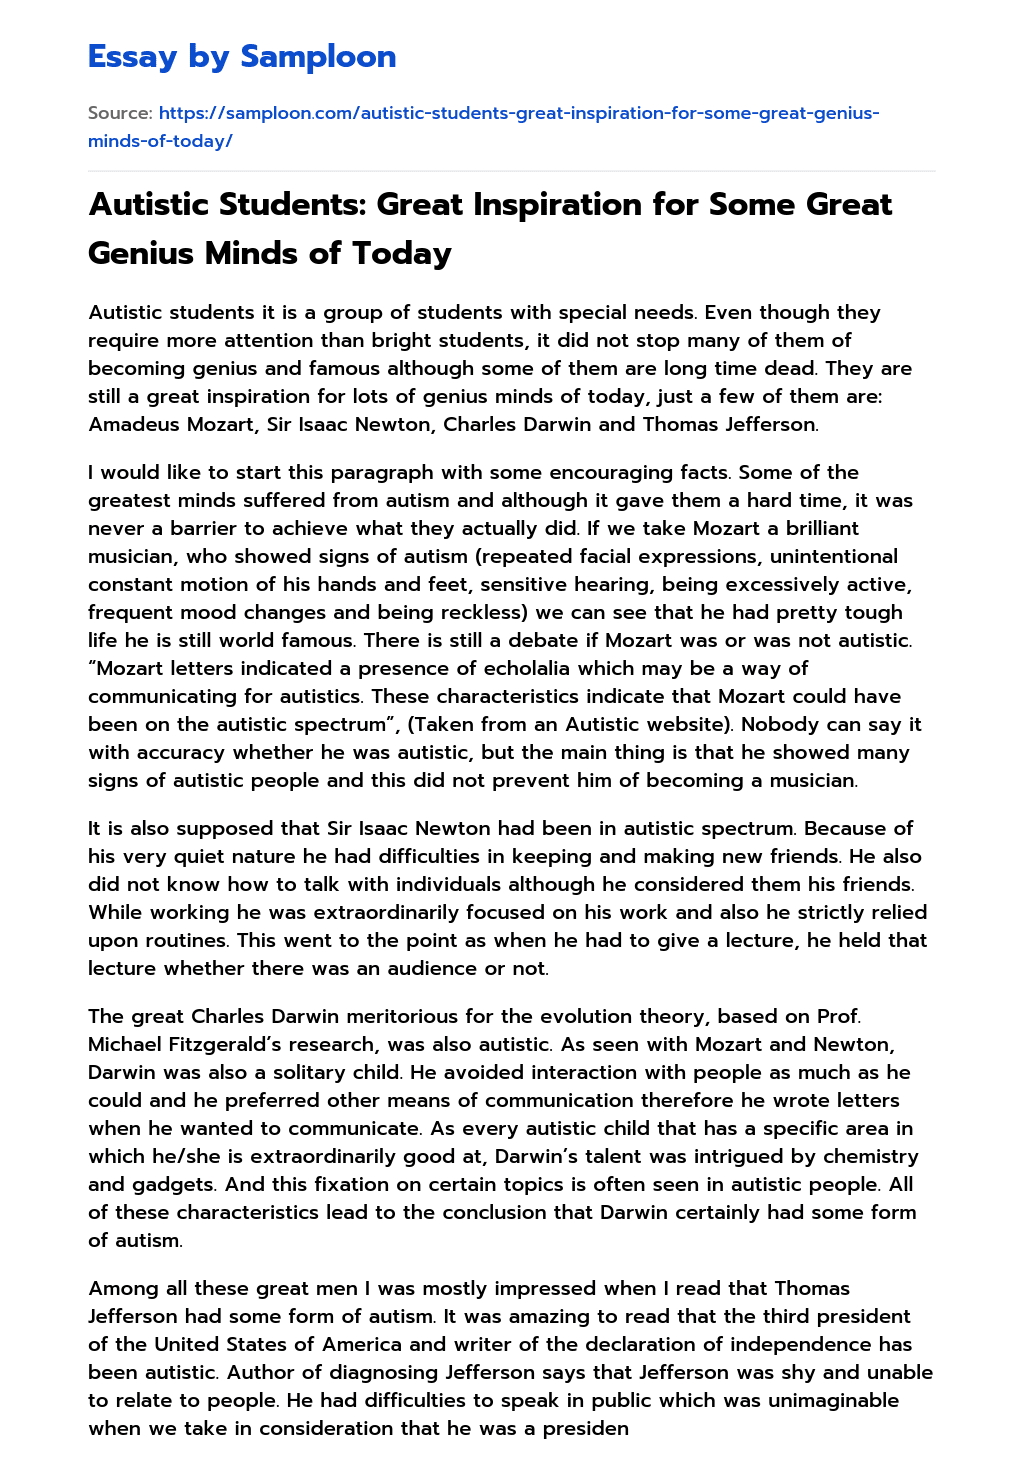 Autistic Students: Great Inspiration for Some Great Genius Minds of Today essay